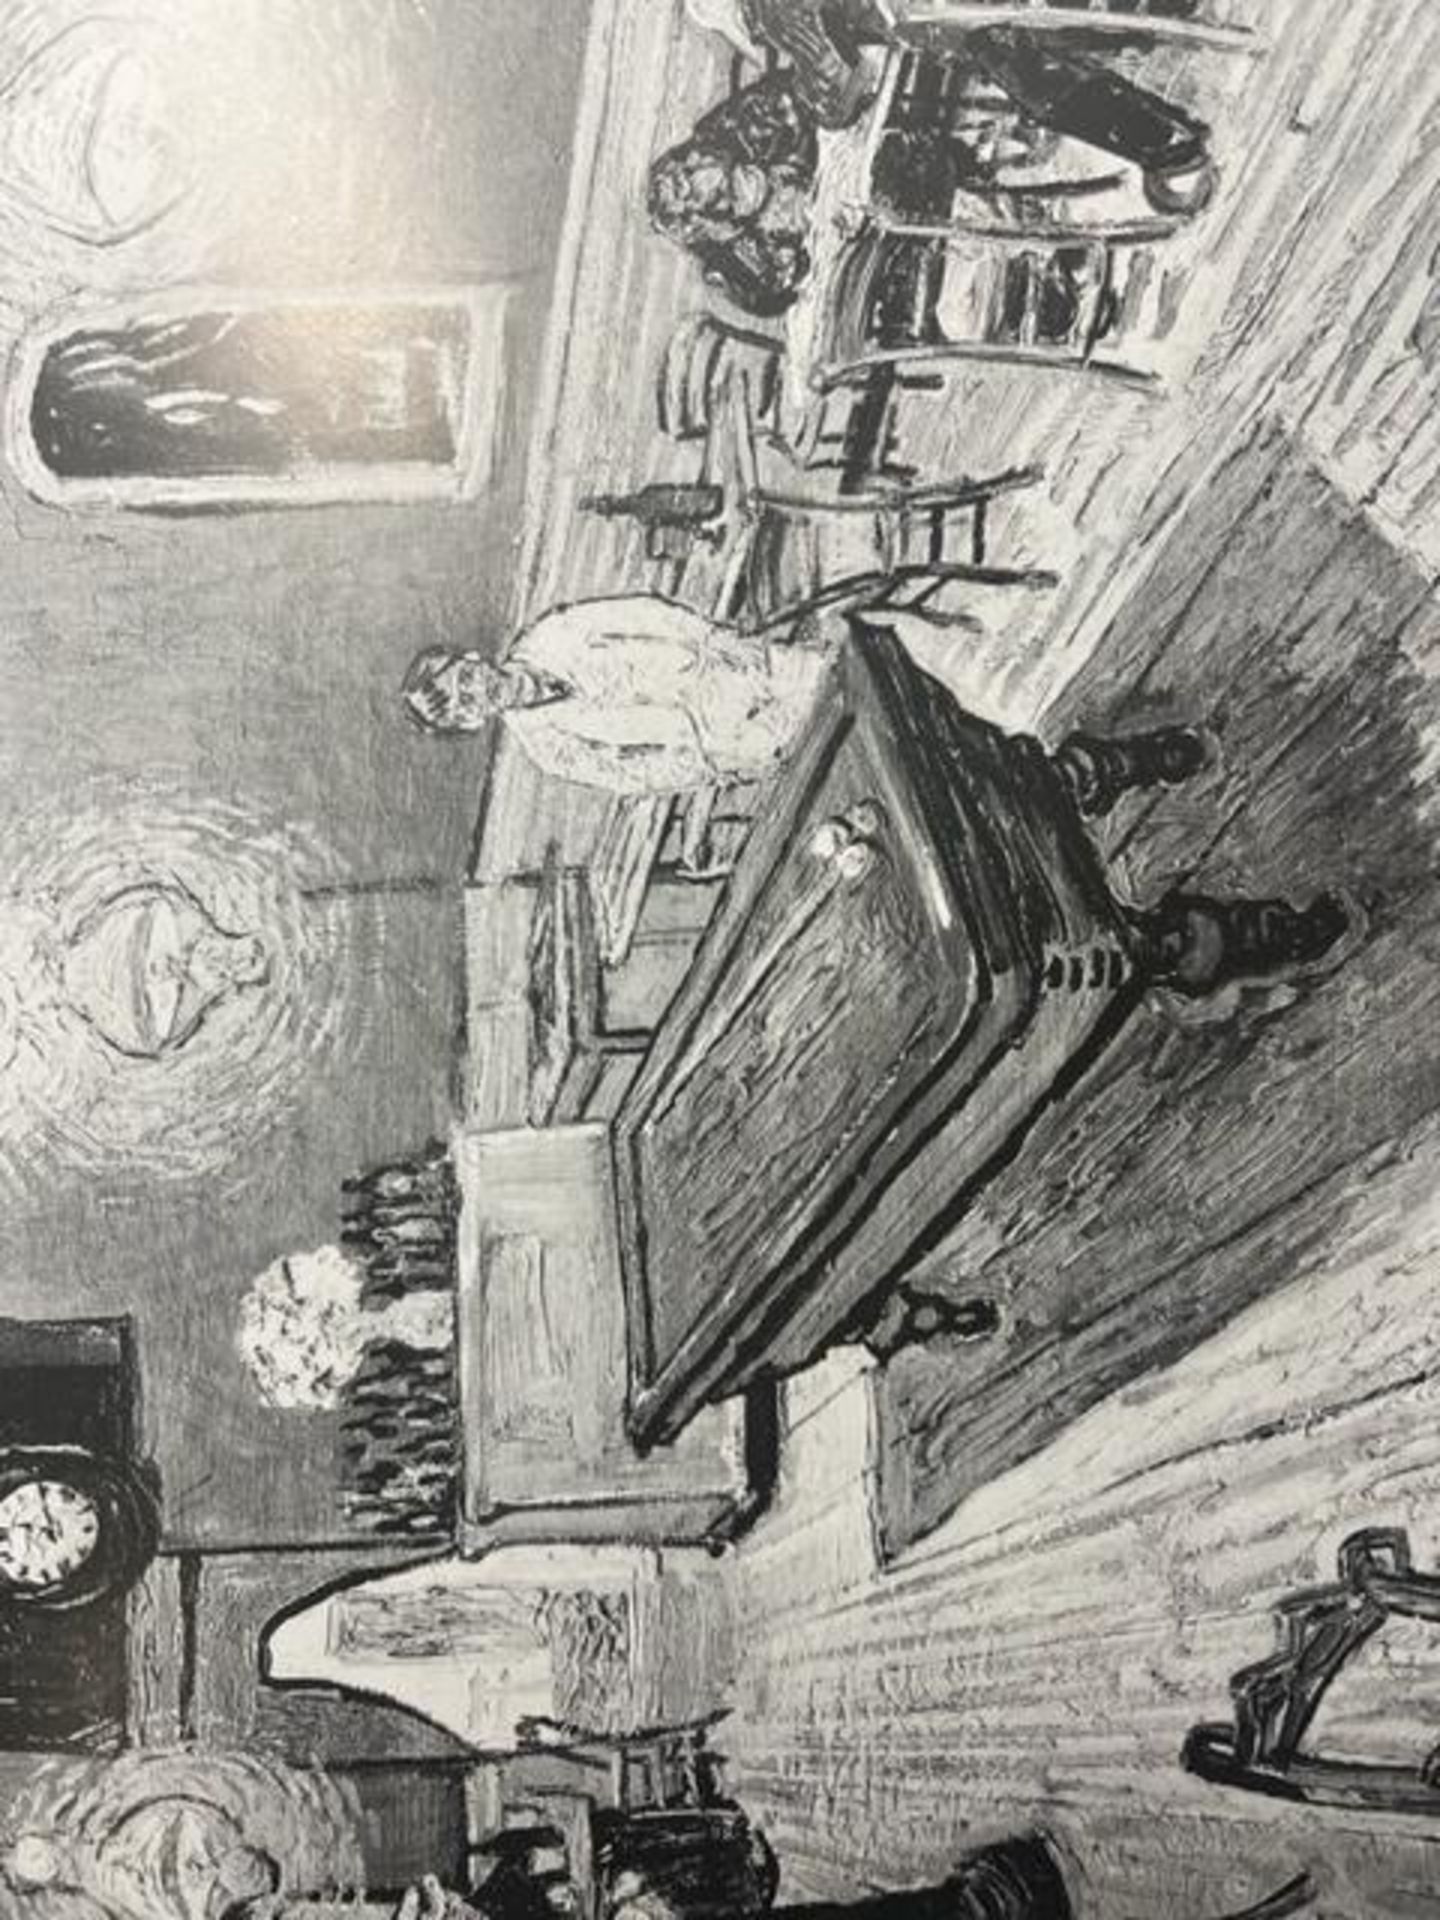 Vincent van Gogh "The Night Cafe" Print. - Image 3 of 6